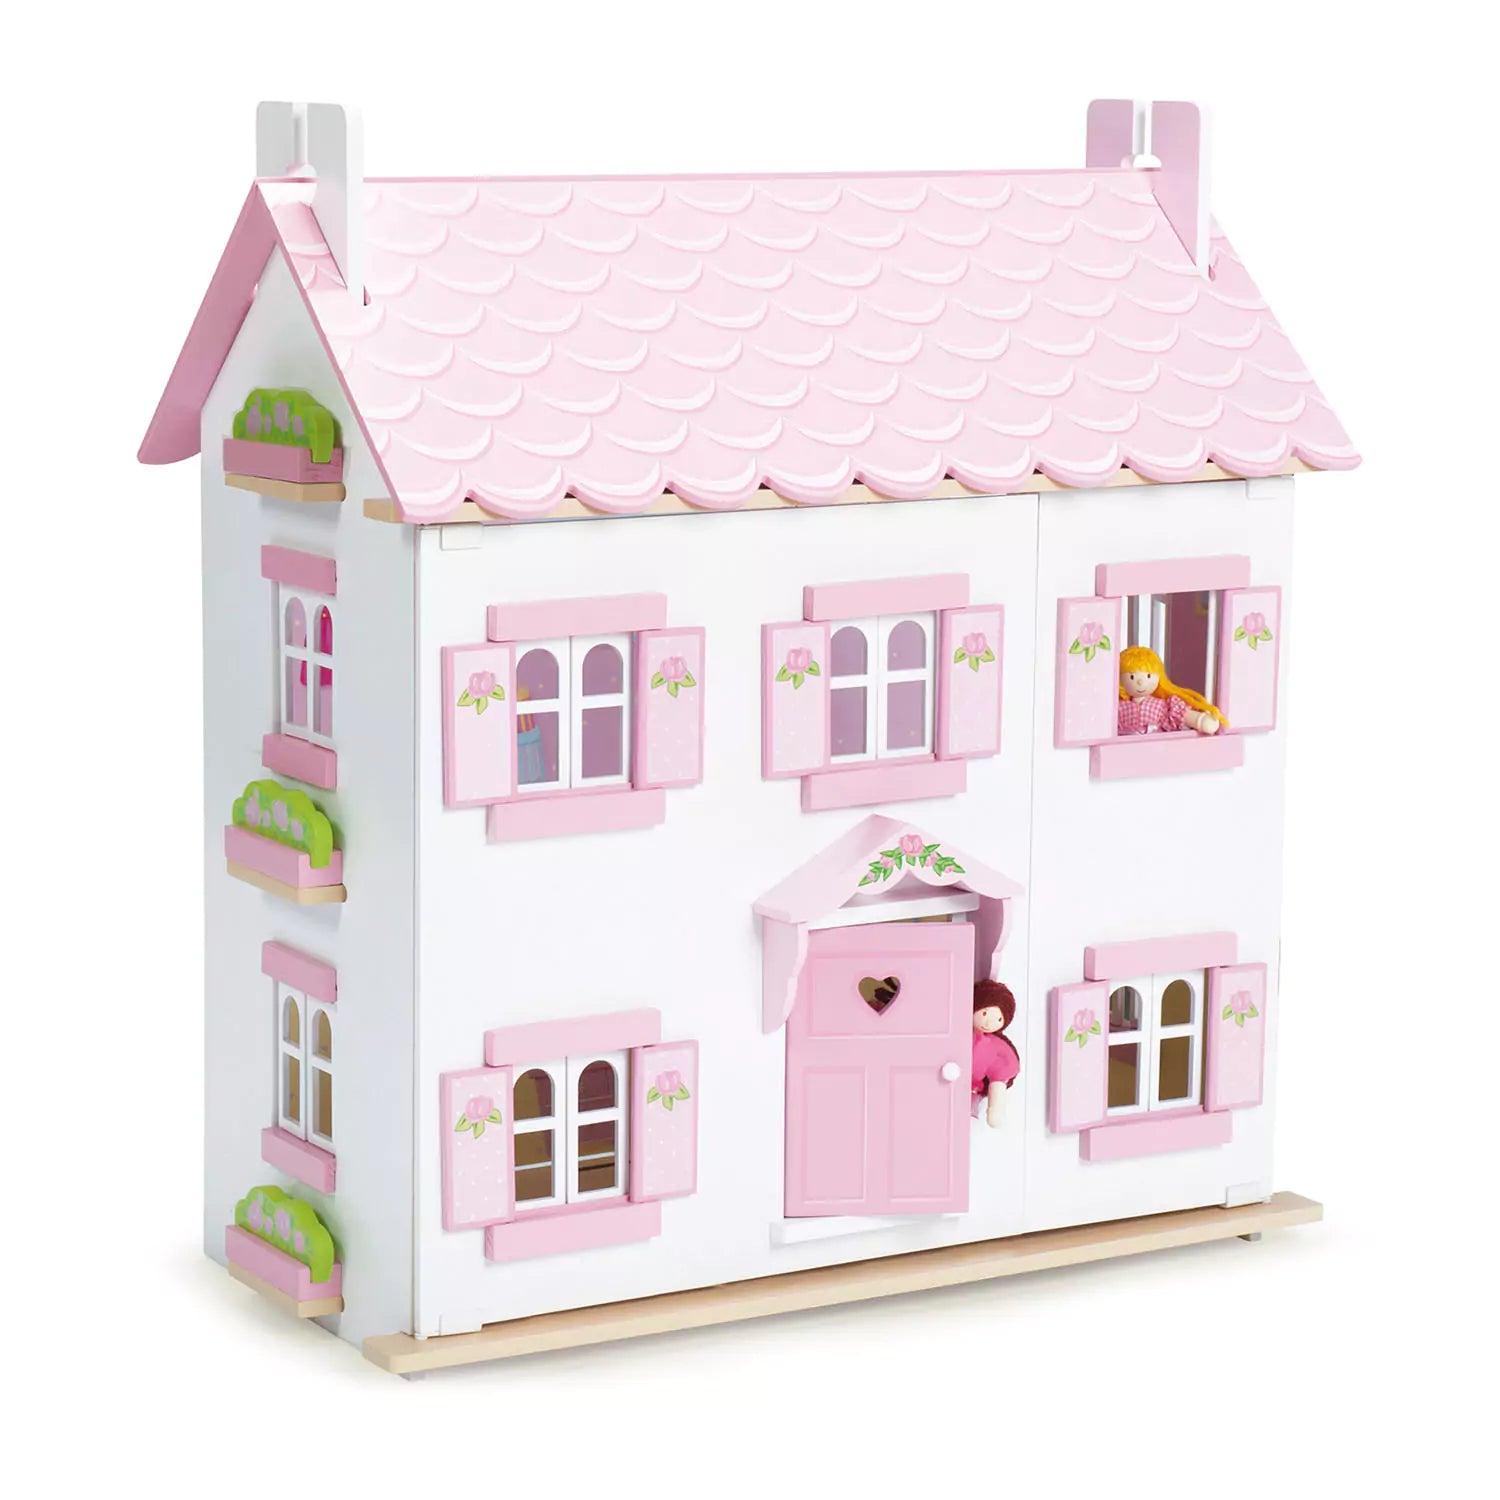 An image of Le Toy Van Sophie's Wooden Dolls House | Playtime | Smallsmart.co.uk